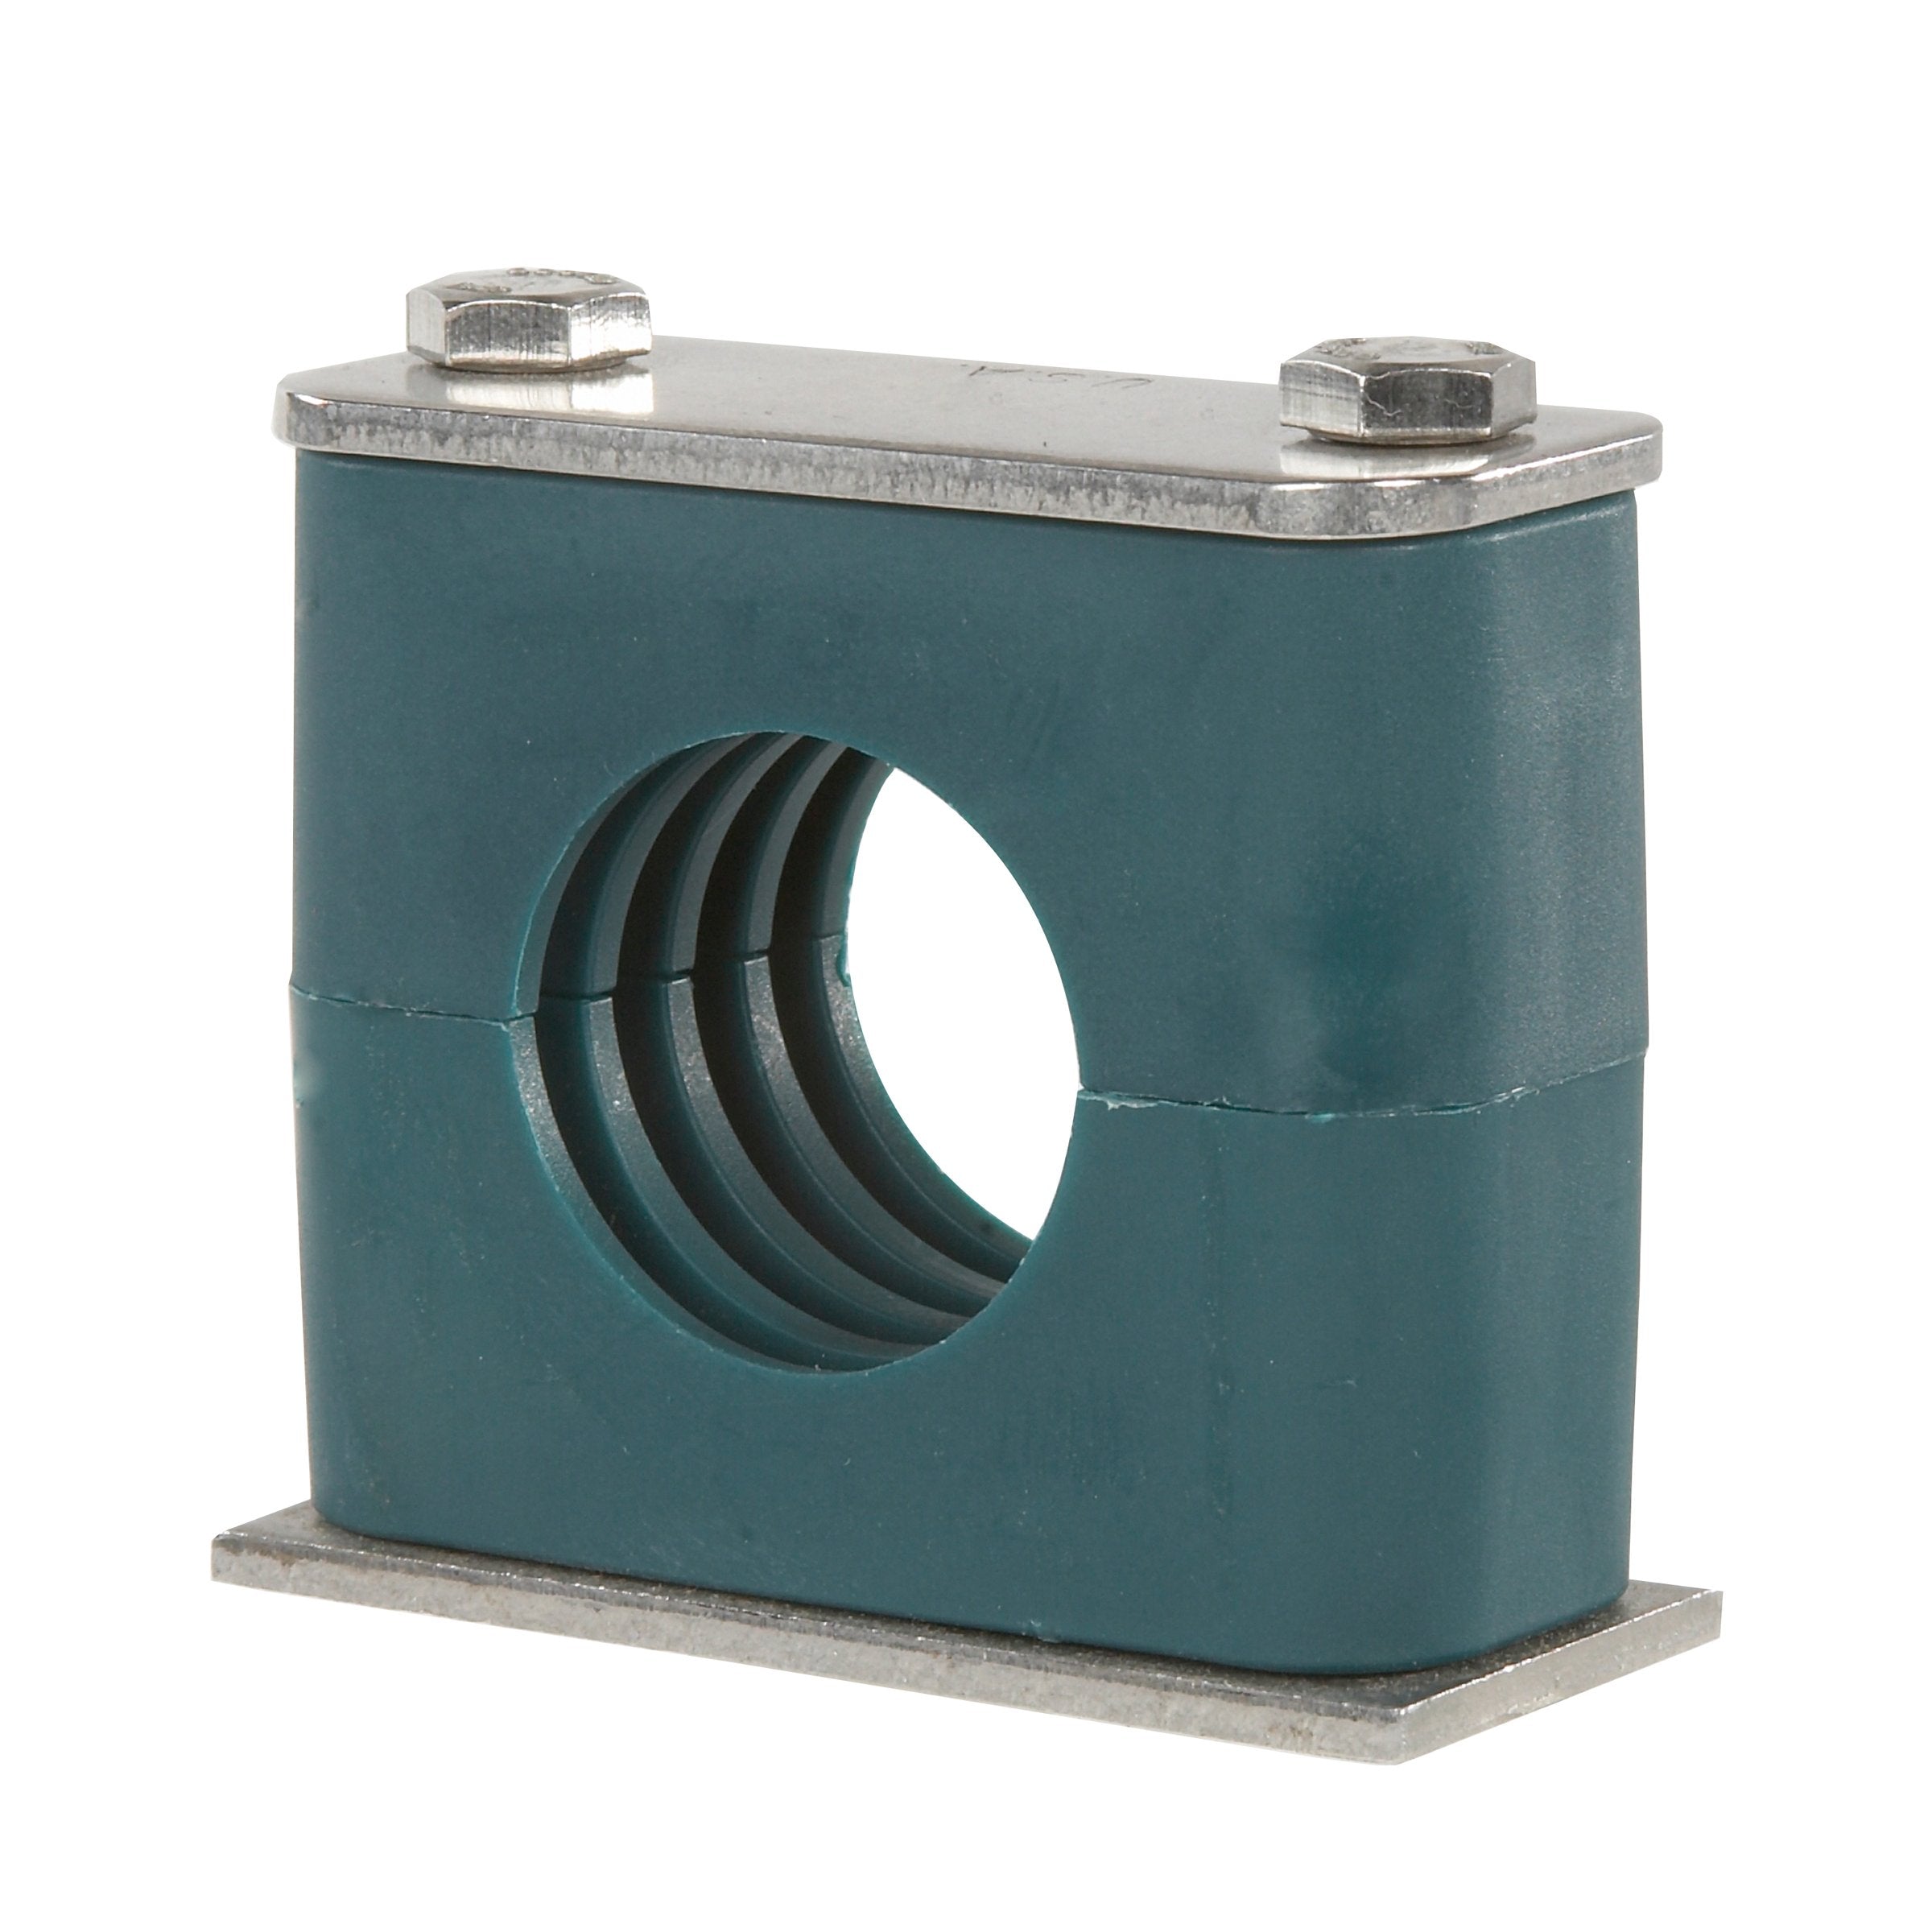 SP-217.2-PP-DP-AS-U-W5 : Stauff Clamp, Single Weld Plate, 0.677" (17.2mm) OD, for 3/8" Pipe, Green PP Insert, Profiled Interior, 316SS